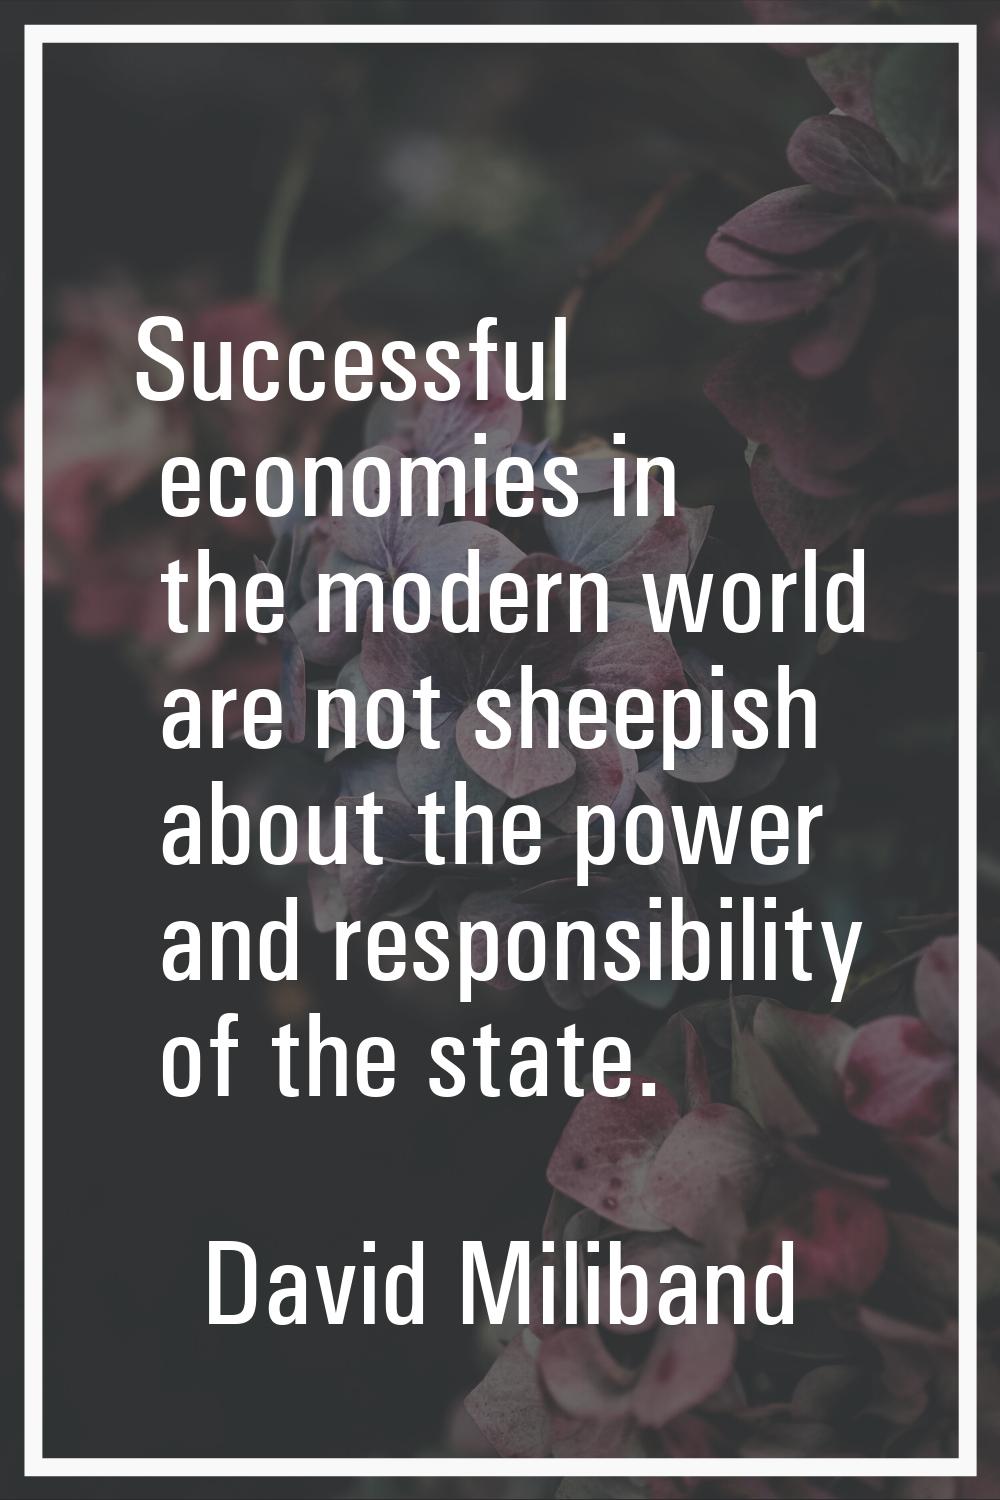 Successful economies in the modern world are not sheepish about the power and responsibility of the